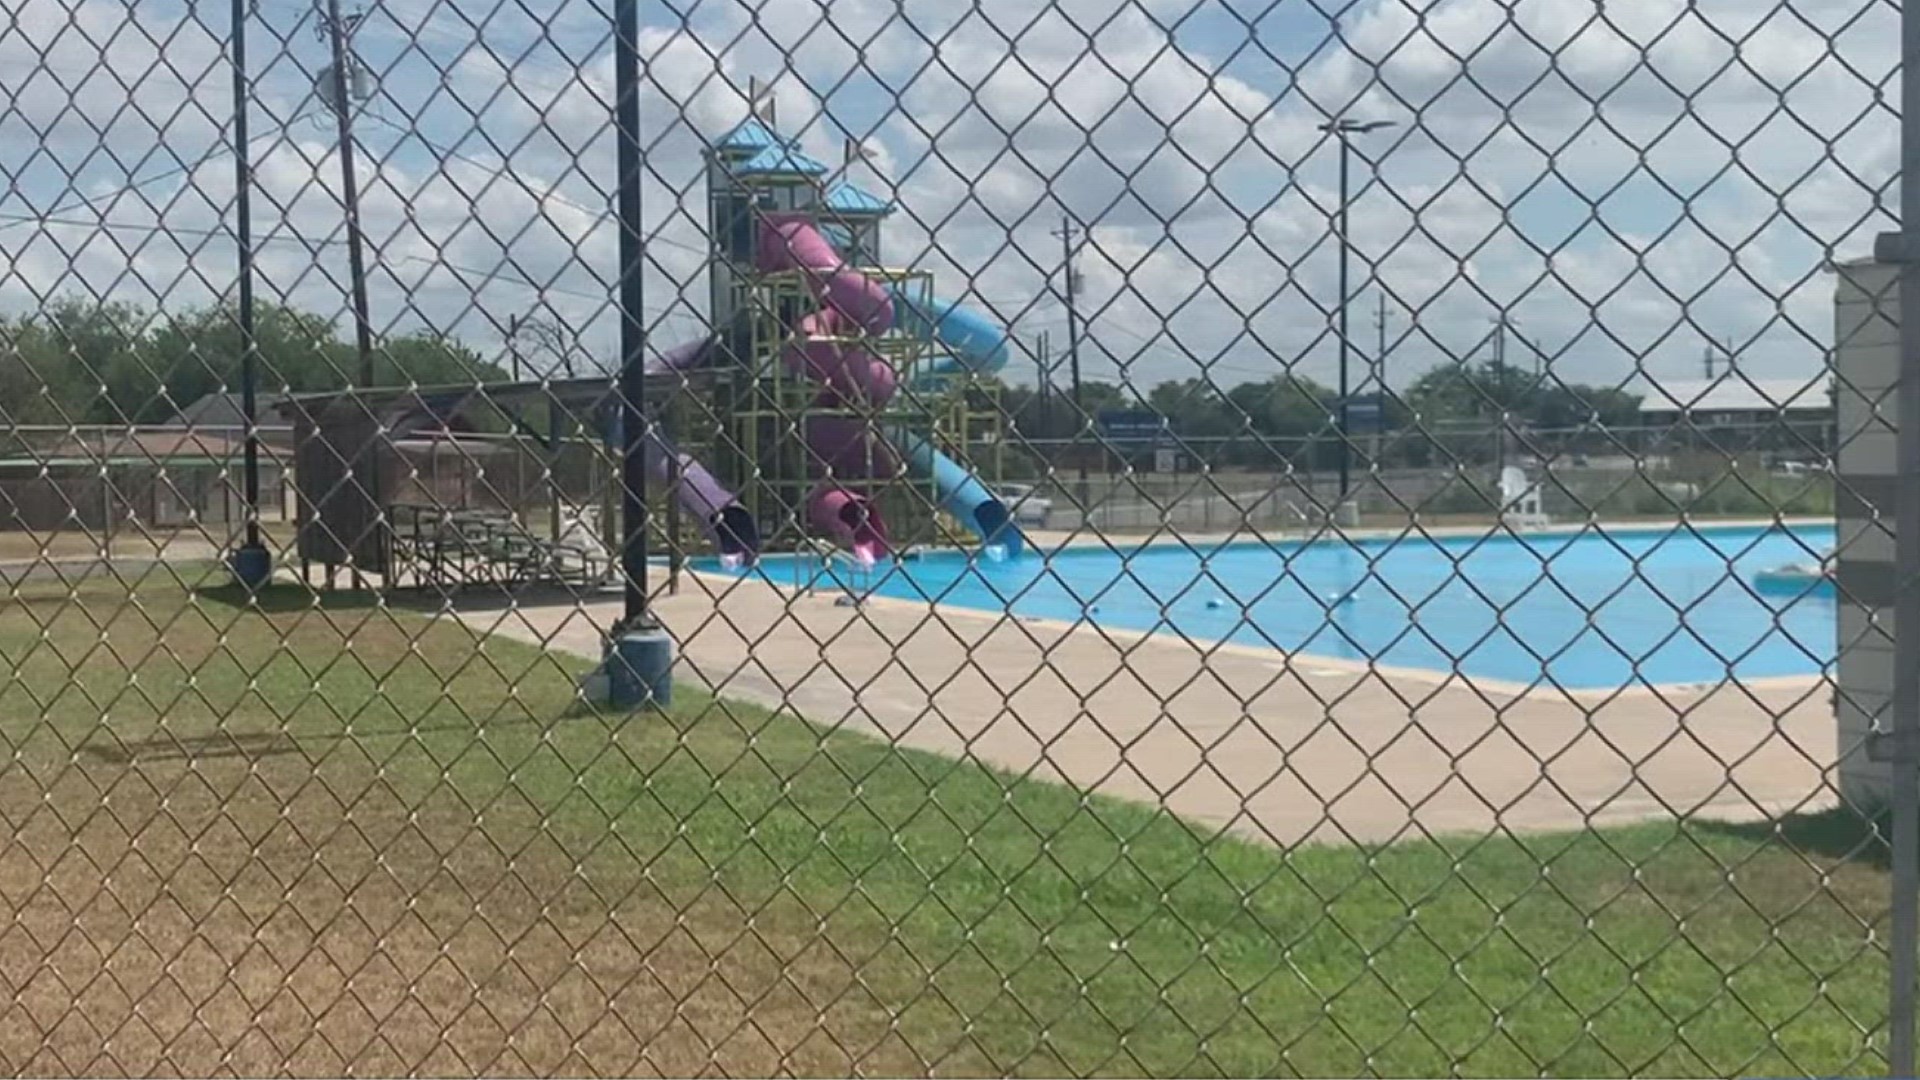 City of Beeville Community Engagement Director Michelle Myers said the city needs to hire more certified lifeguards for the duration of summer.